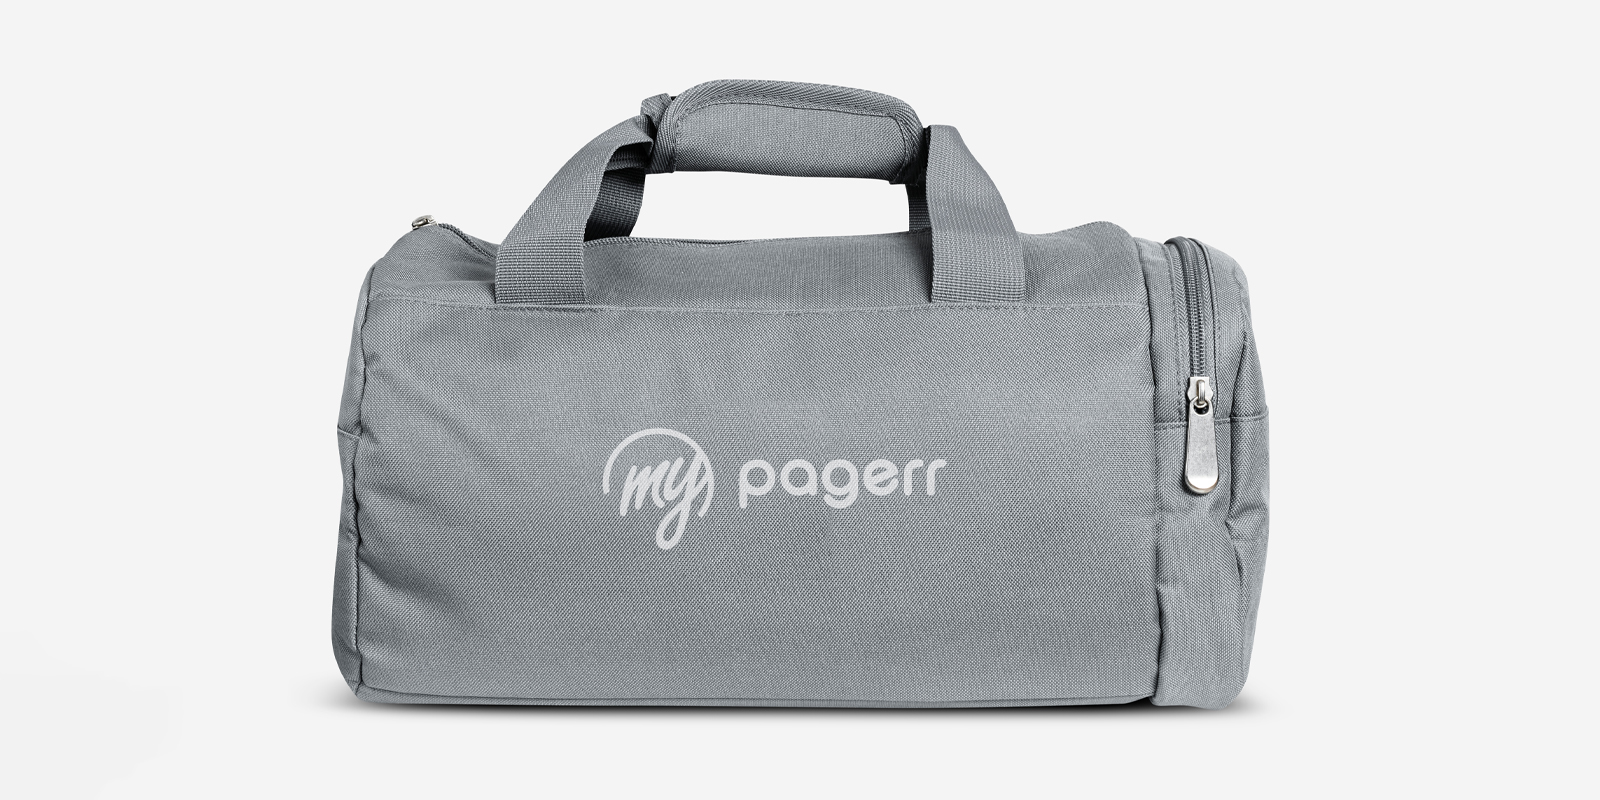 Duffel & gym bags in Newcastle - Print with Pagerr